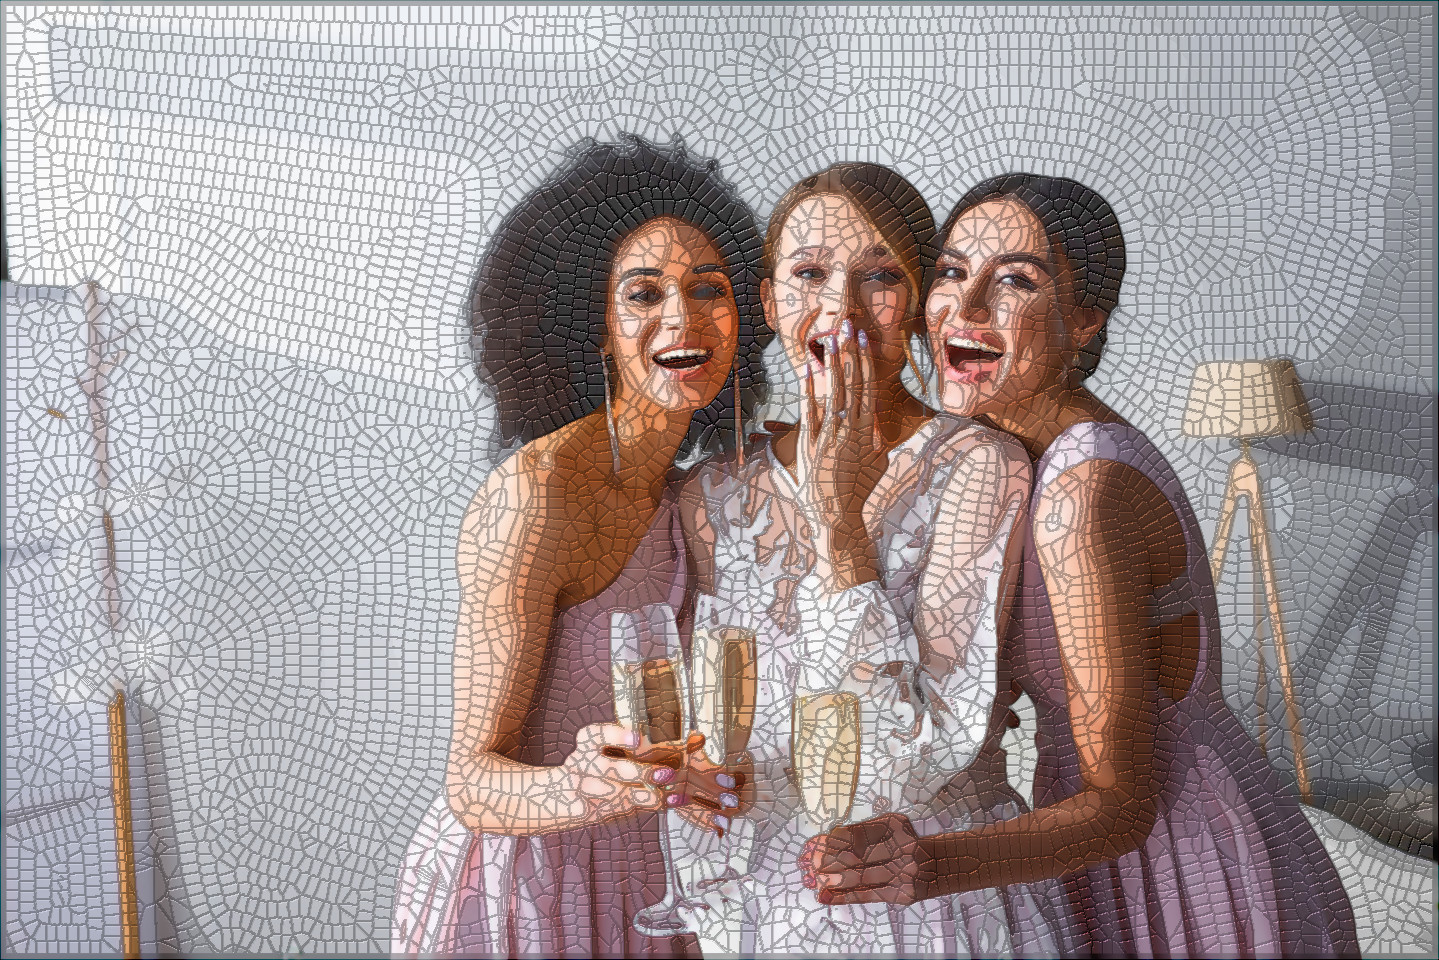 2023-09-20 08-27-11 stock-photo-laughing-bride-covering-mouth-hand, as a Roman Mosaic  (parms=14,0,1,3,8,1,2,0).jpg